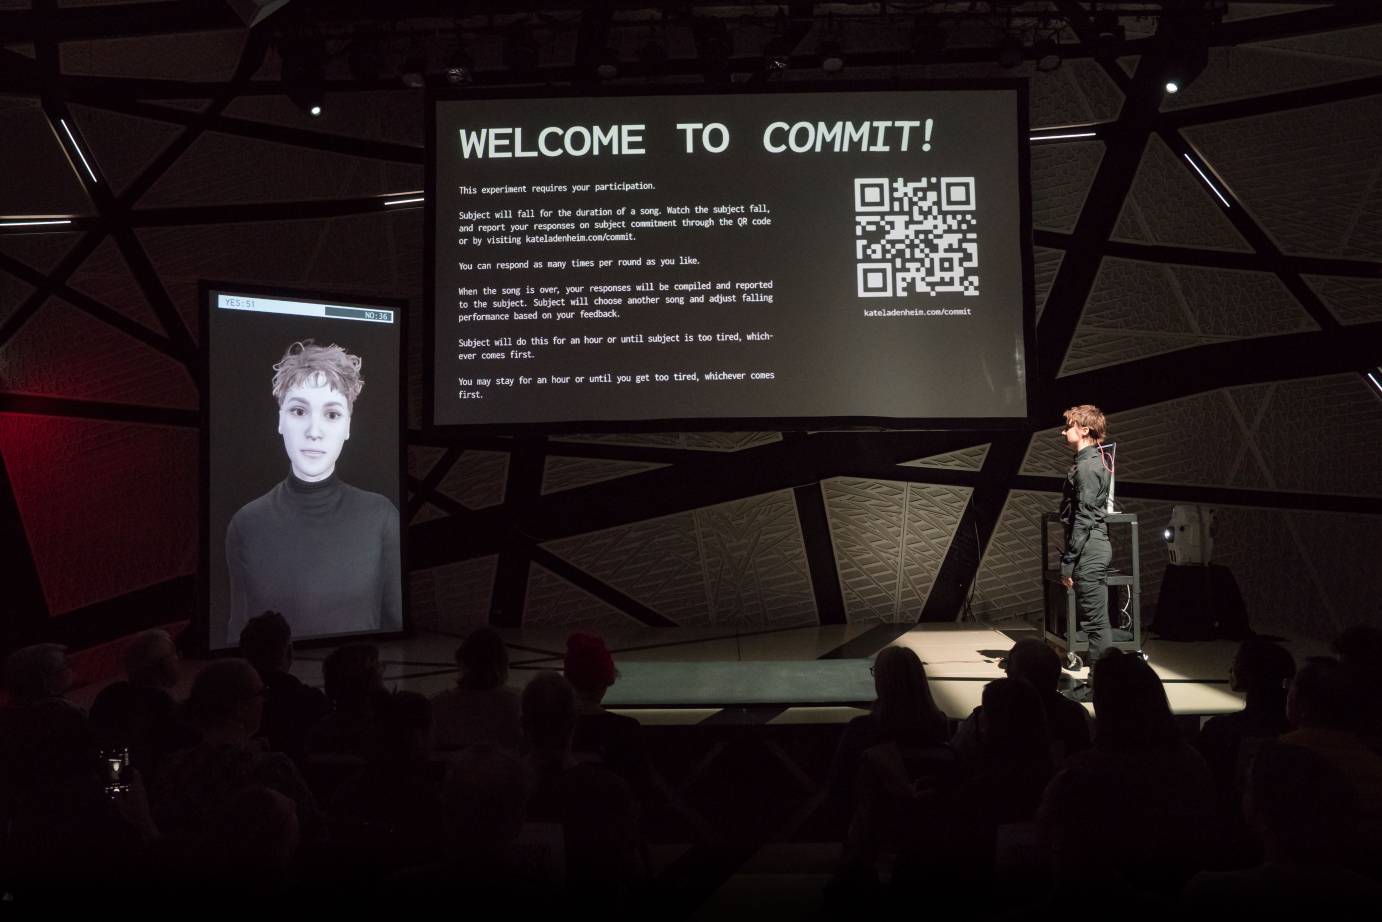 White lettering on a black sign says, WELCOME TO COMMIT! and then lists requirements. The AI photo of a young person with short touseled hair and wearing a black turtleneck looks out at the viewer while that actual person stands to the right of these projections.